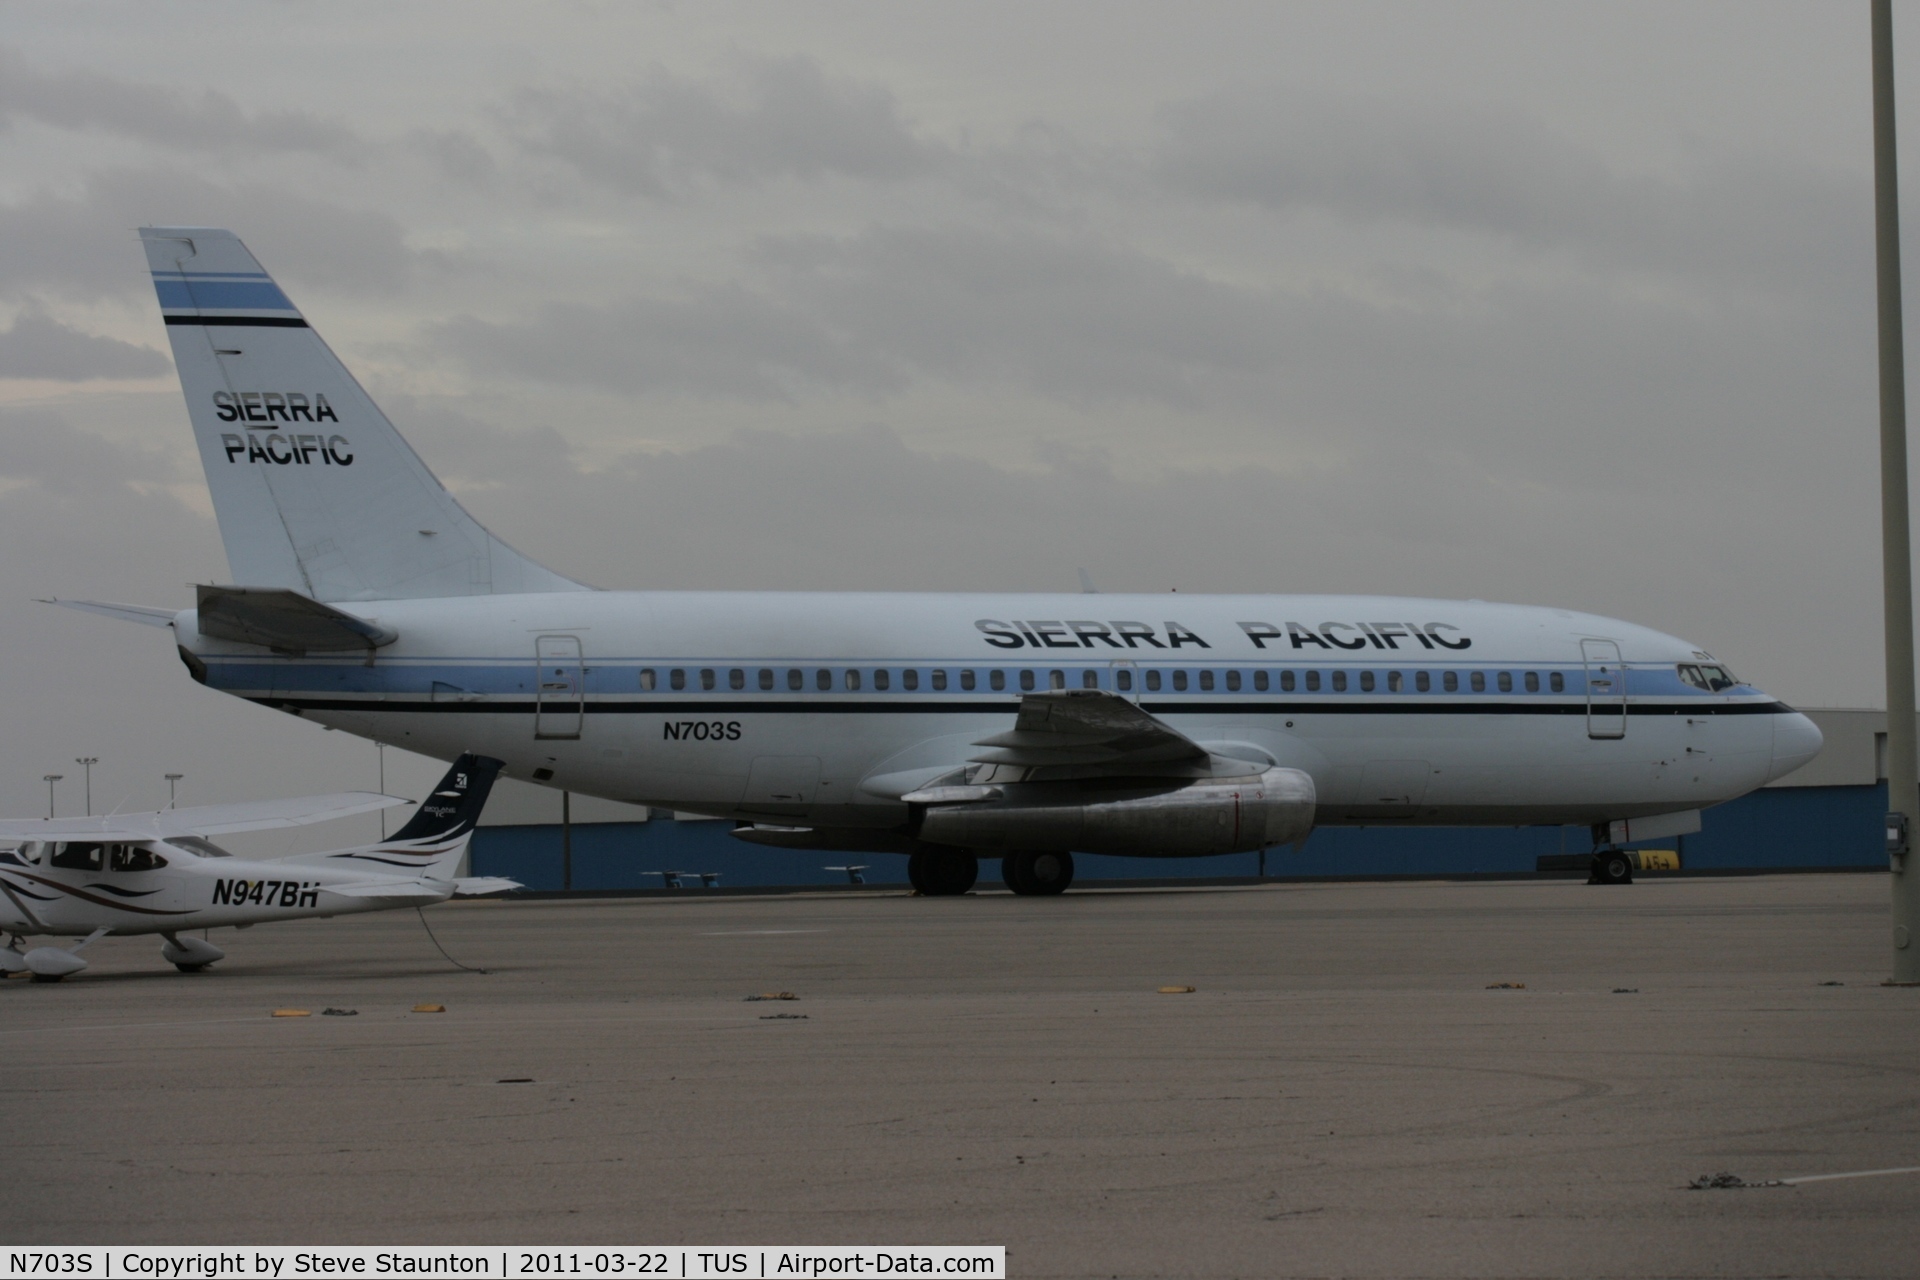 N703S, 1981 Boeing 737-2T4 C/N 22529, Taken at Tucson Airport, in March 2011 whilst on an Aeroprint Aviation tour